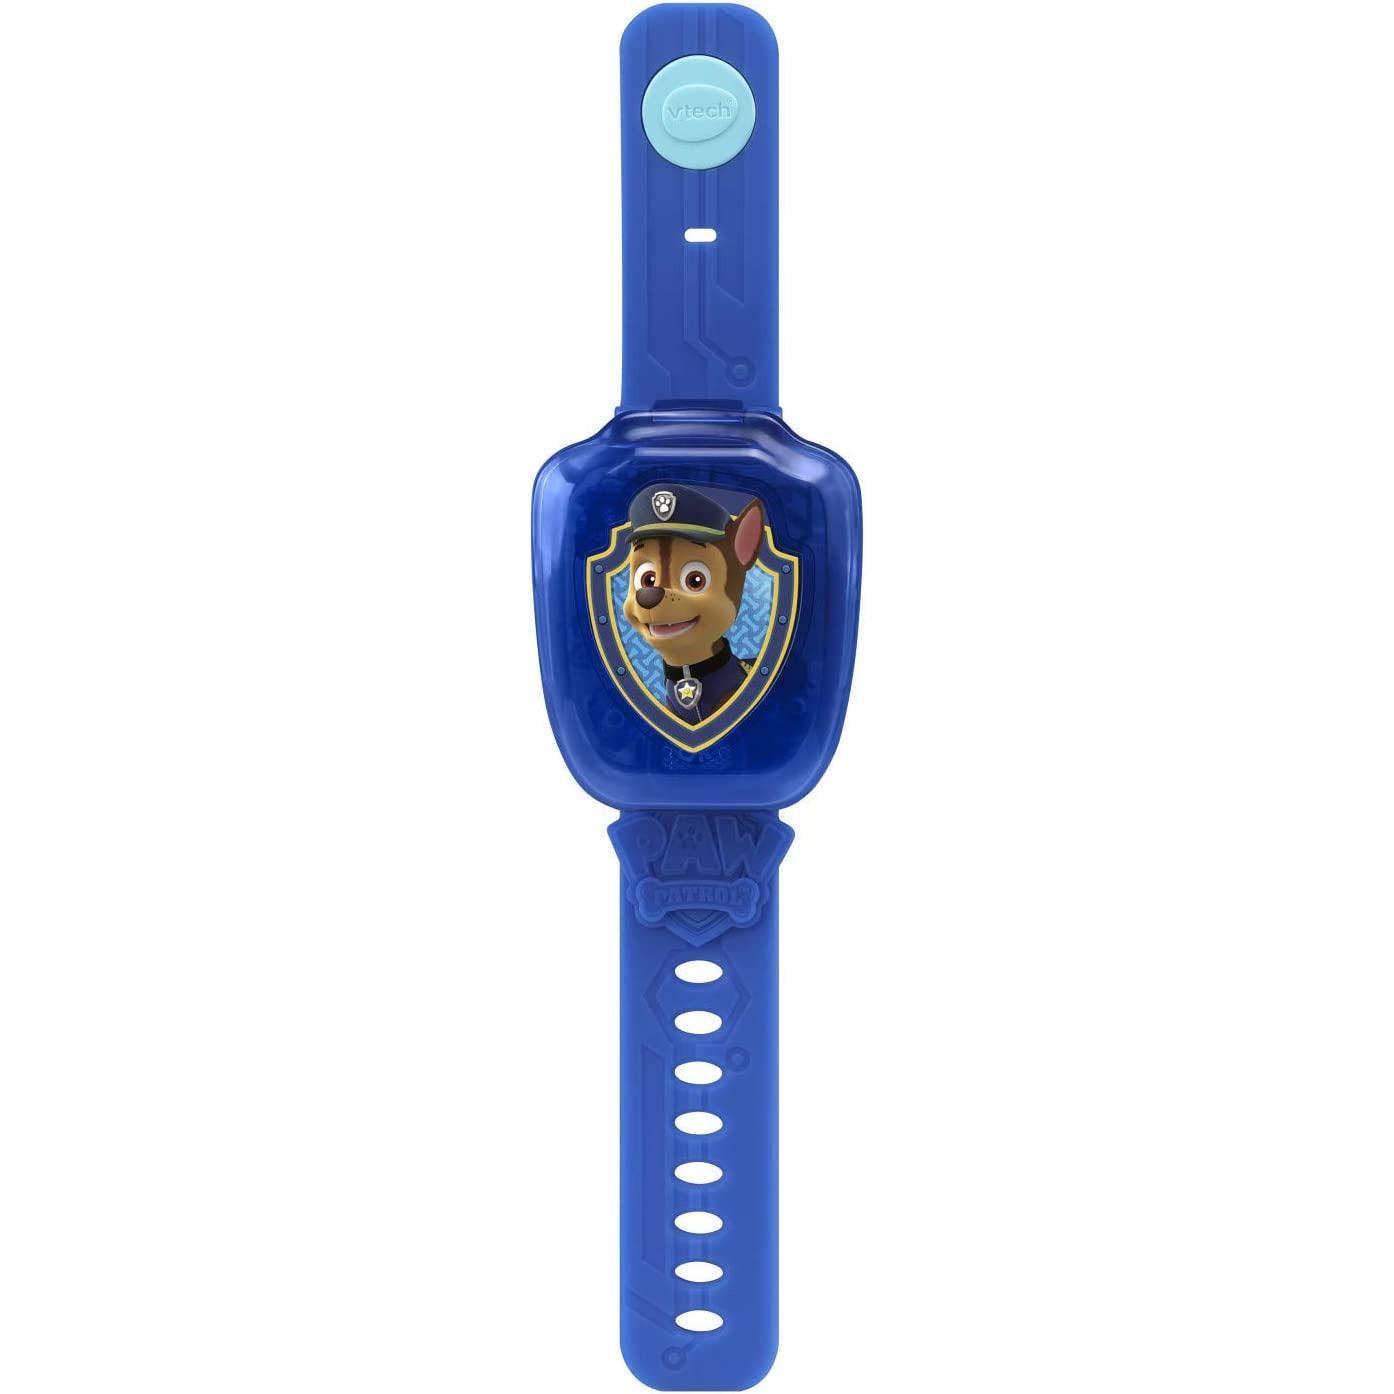 PAW Patrol Chase Learning Watch VTech, Blue - BumbleToys - 5-7 Years, Kids, Paw Patrol, Pre-Order, Watch